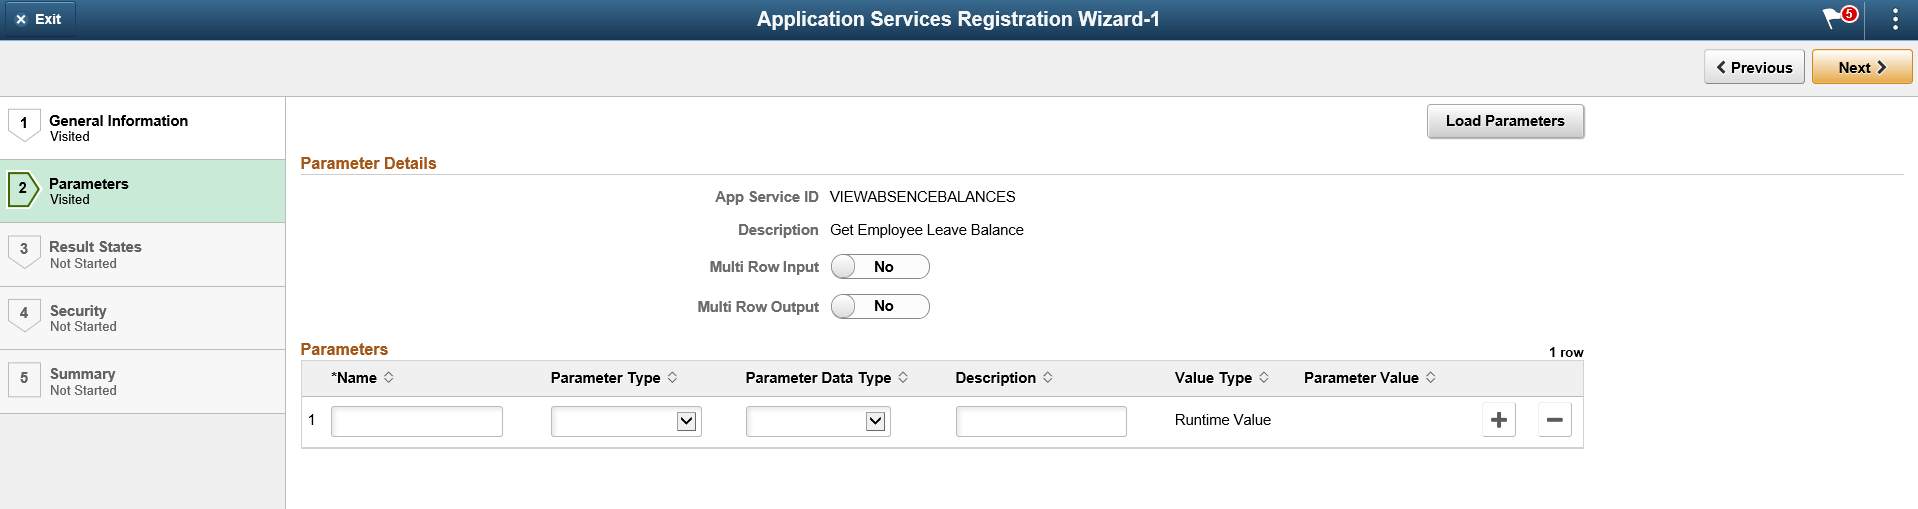 Application Service Registration Wizard - Parameters page